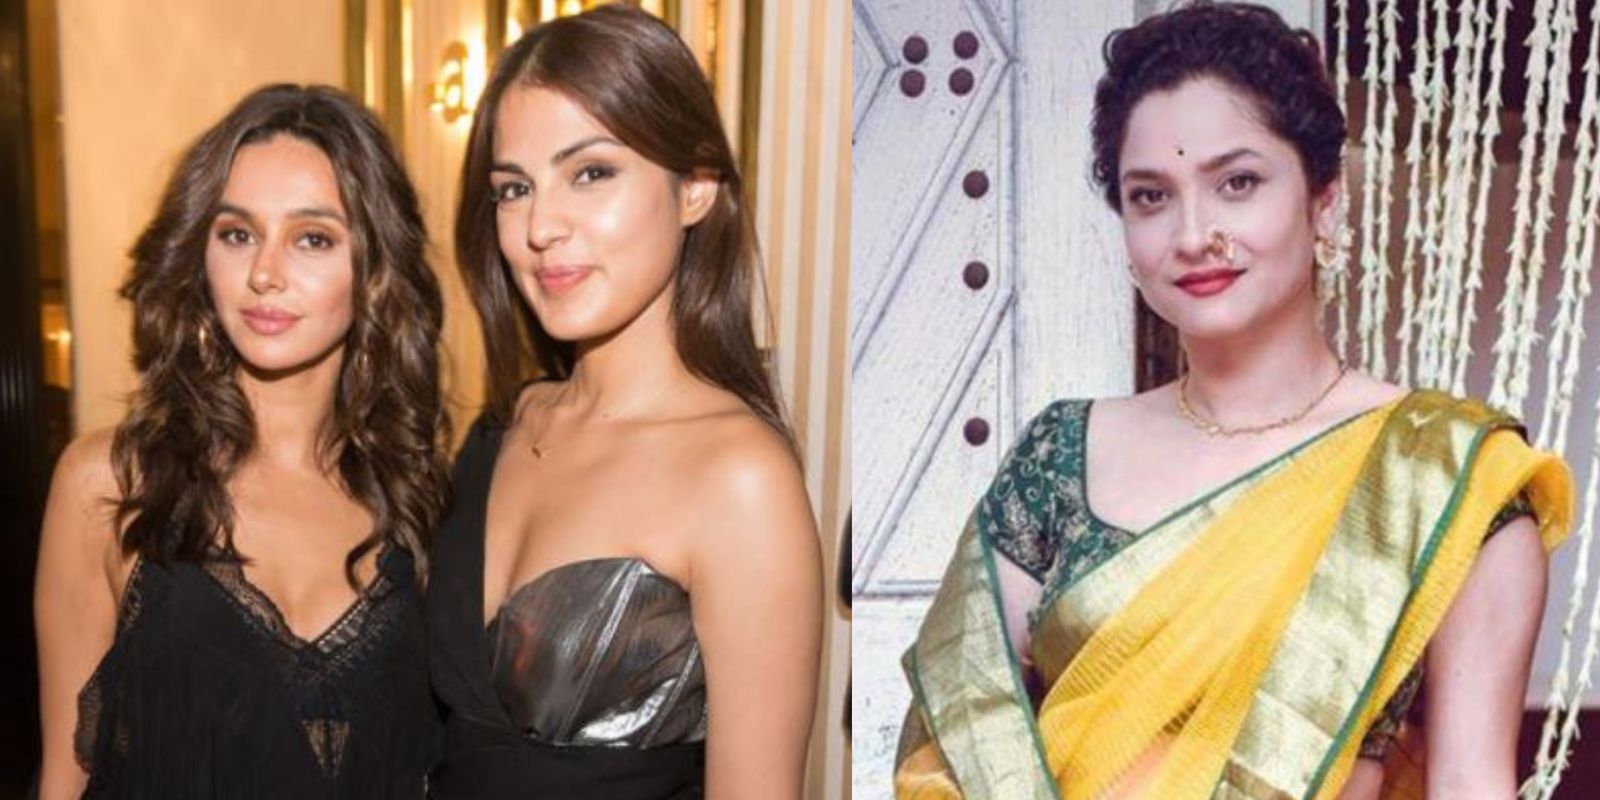 Shibani Dandekar Lashes Out At Ankita Lokhande, Says She 'Wants Her 2 Seconds Of Fame' And 'Needs To Be Called Out'